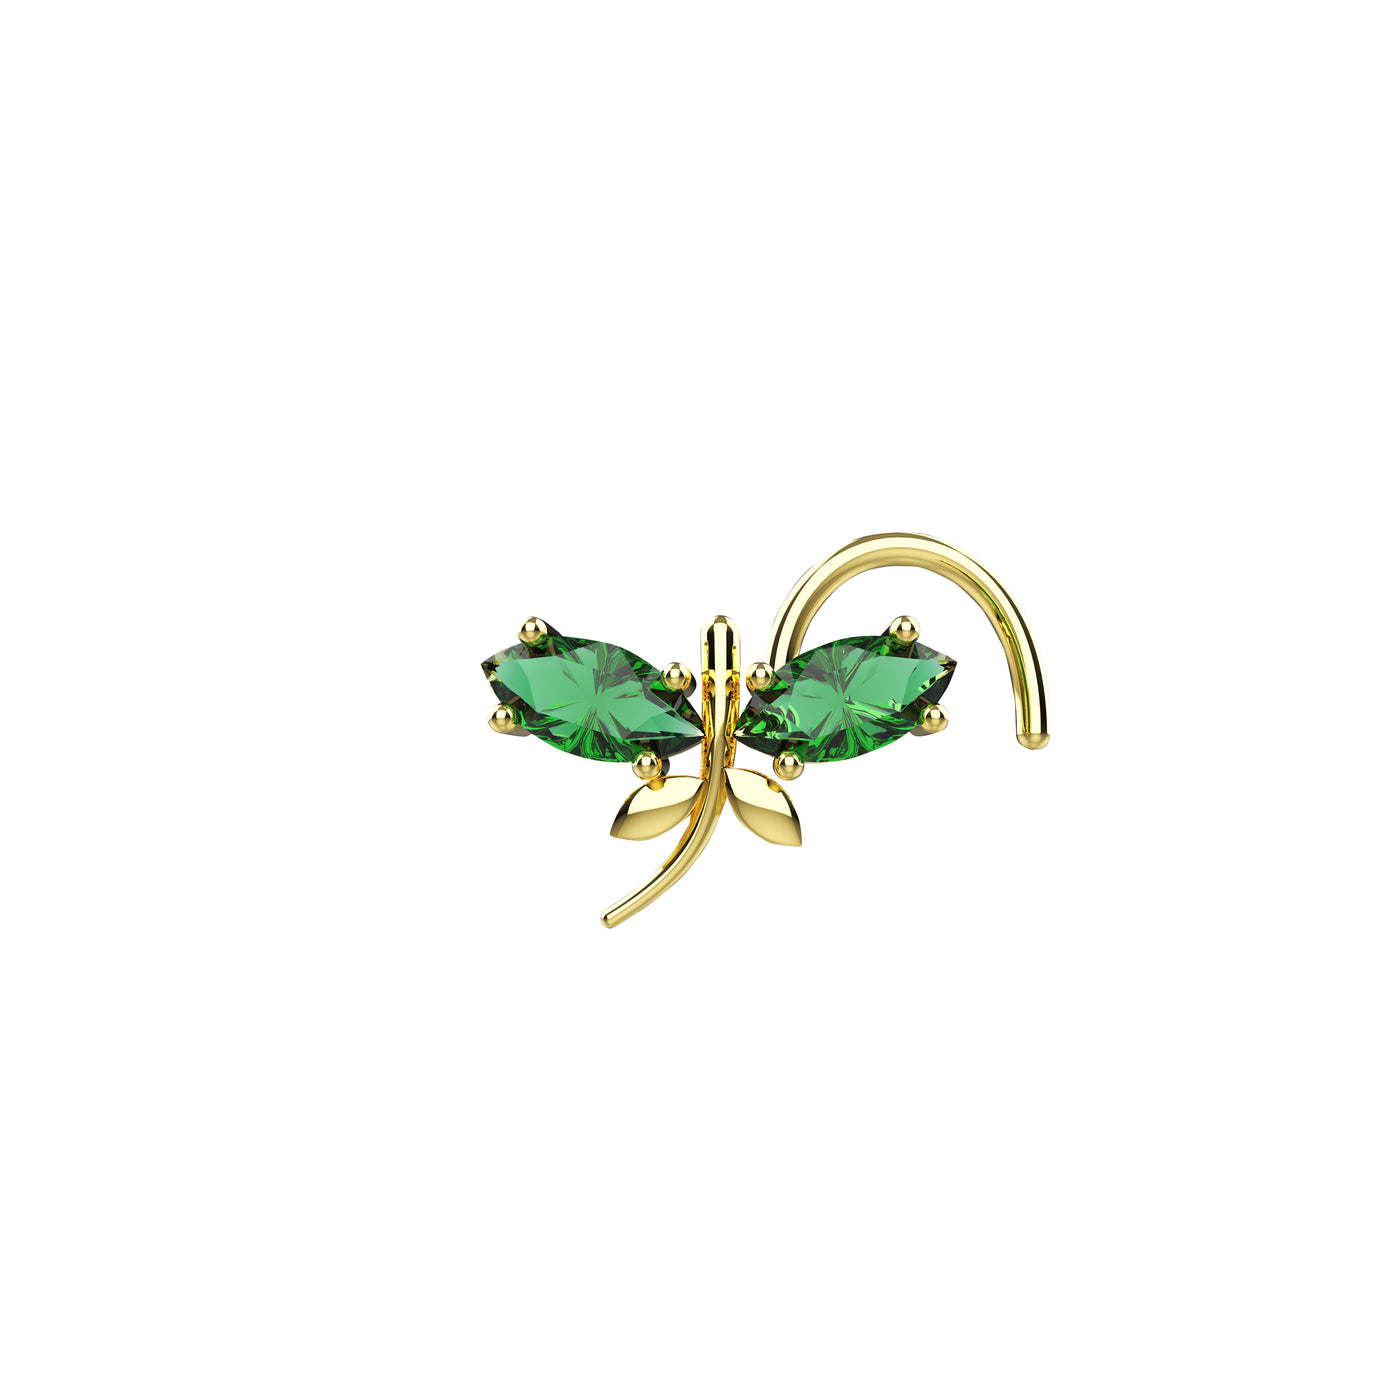 Emerald Dragonfly Nose Stud